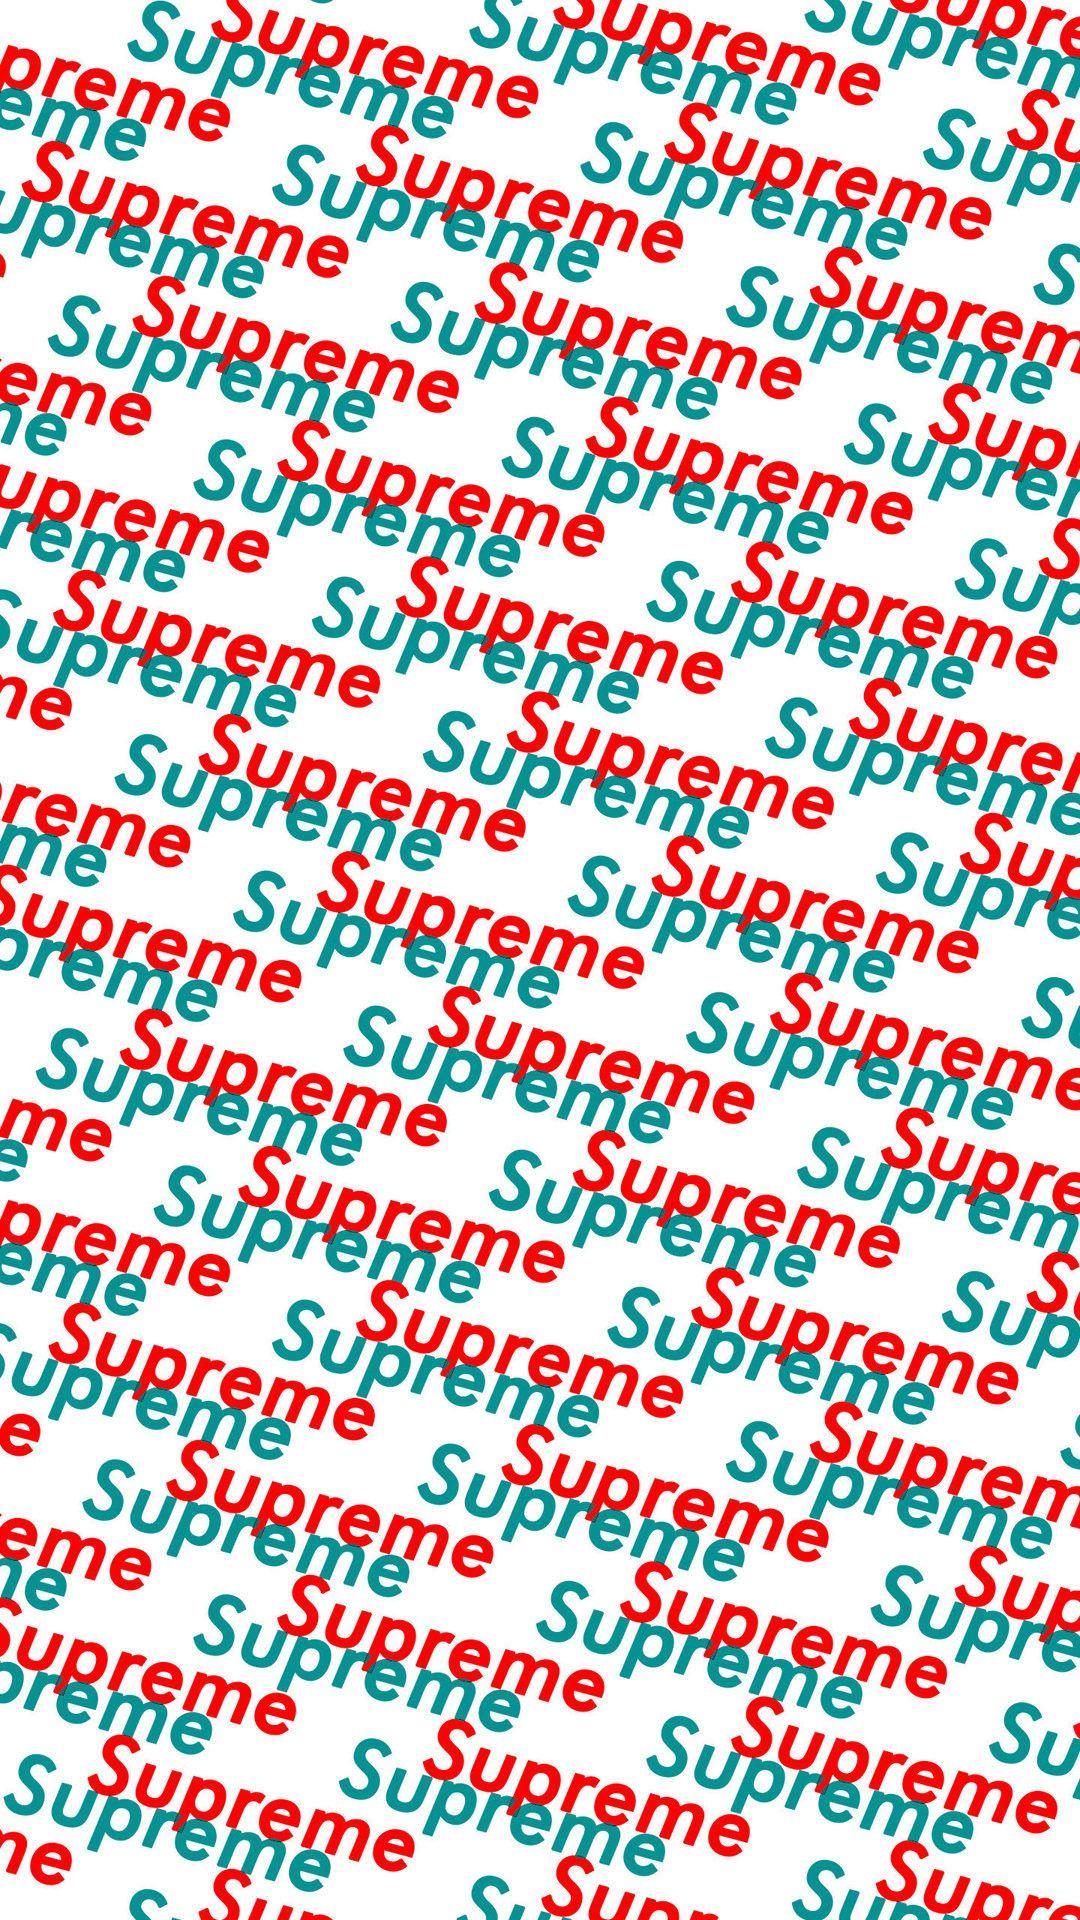 Supreme Is Acquired by VF Corporation for a 21 Billion